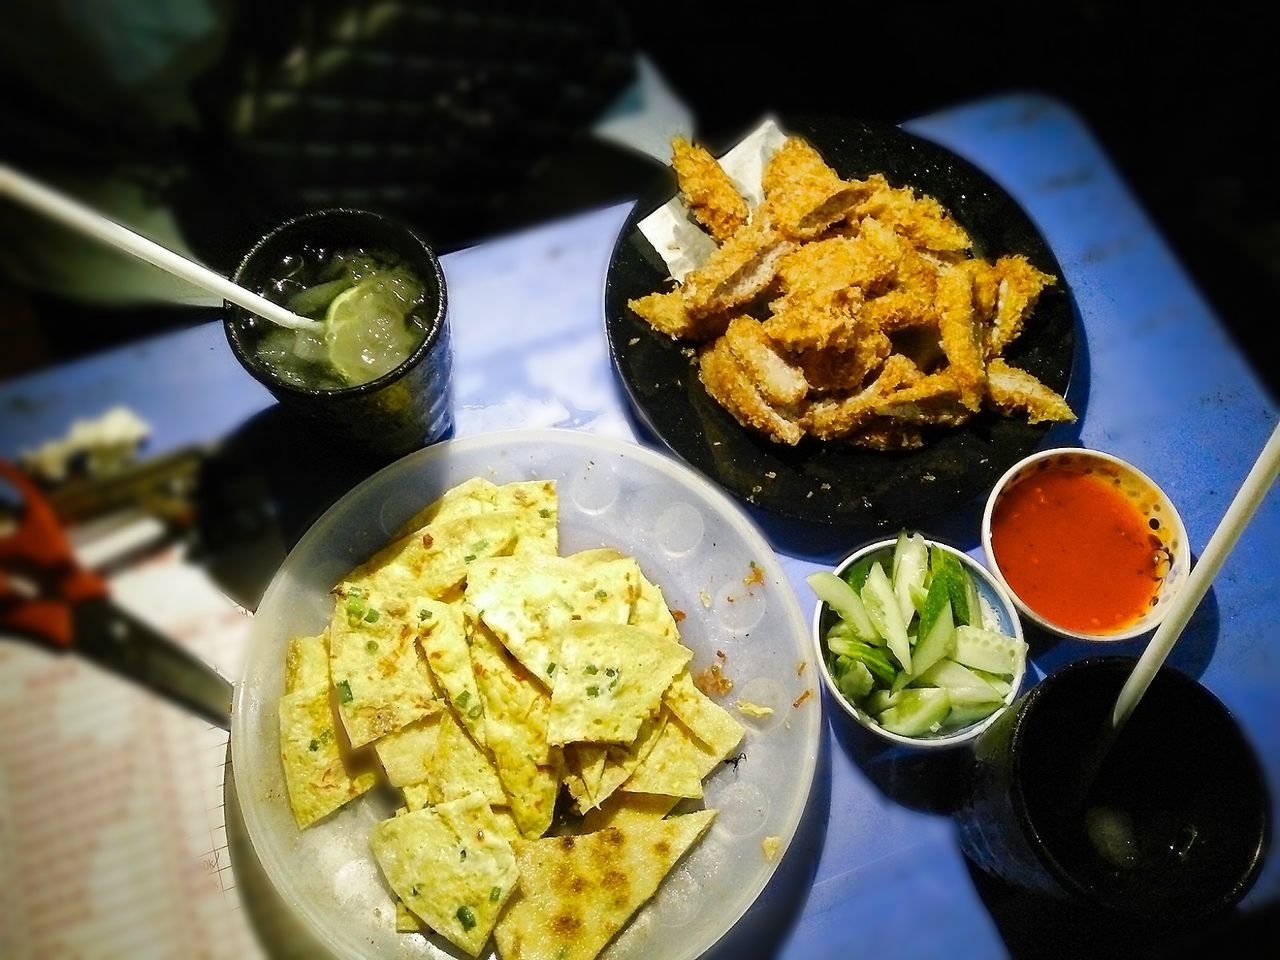 CLOSE-UP OF FOOD ON TABLE